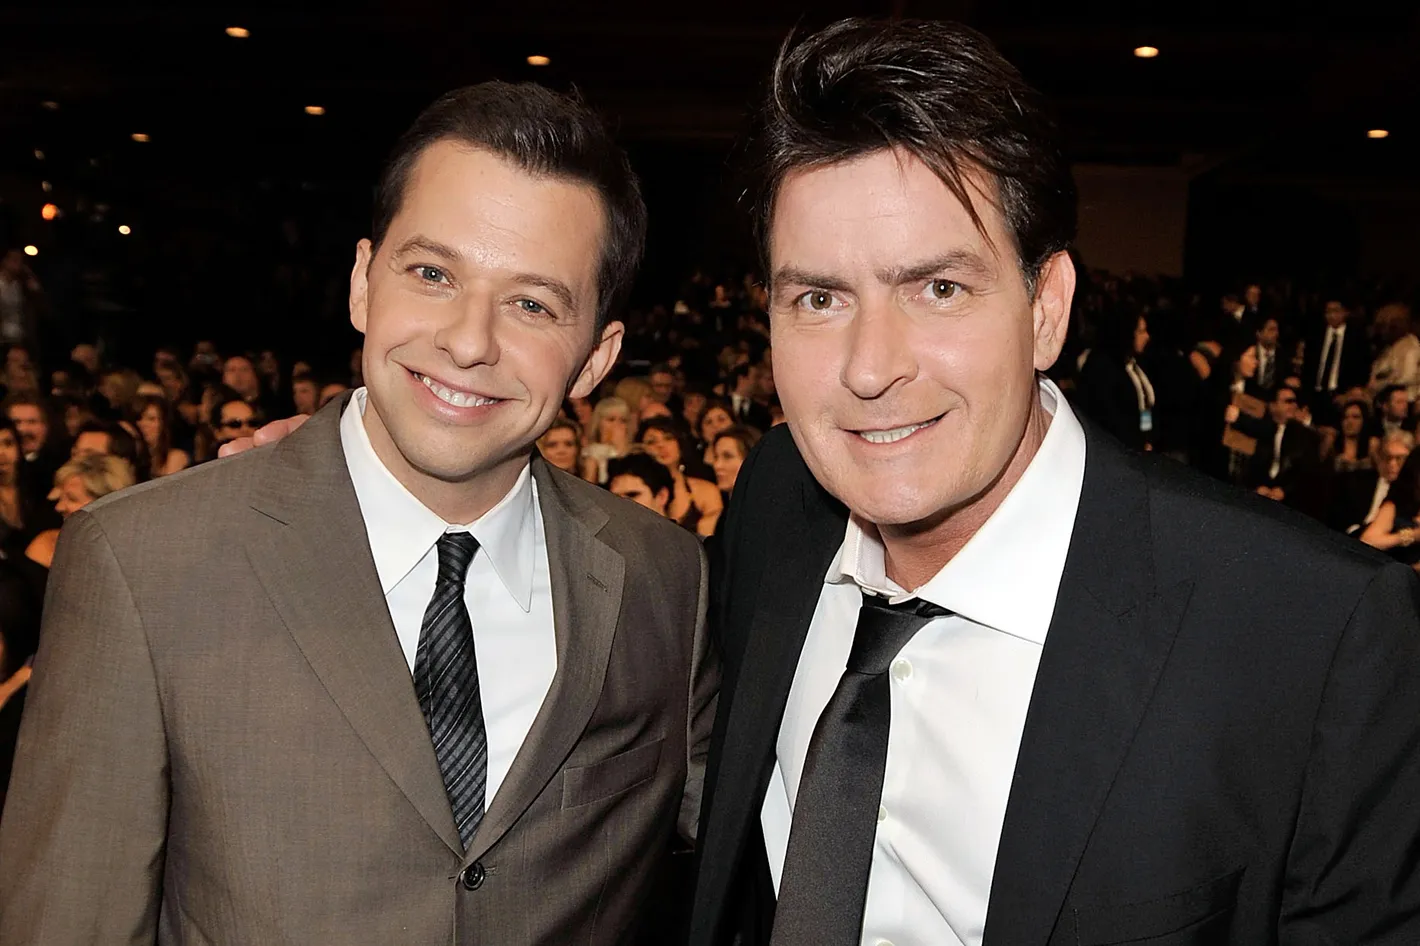 Jon Cryer and Charlie Sheen